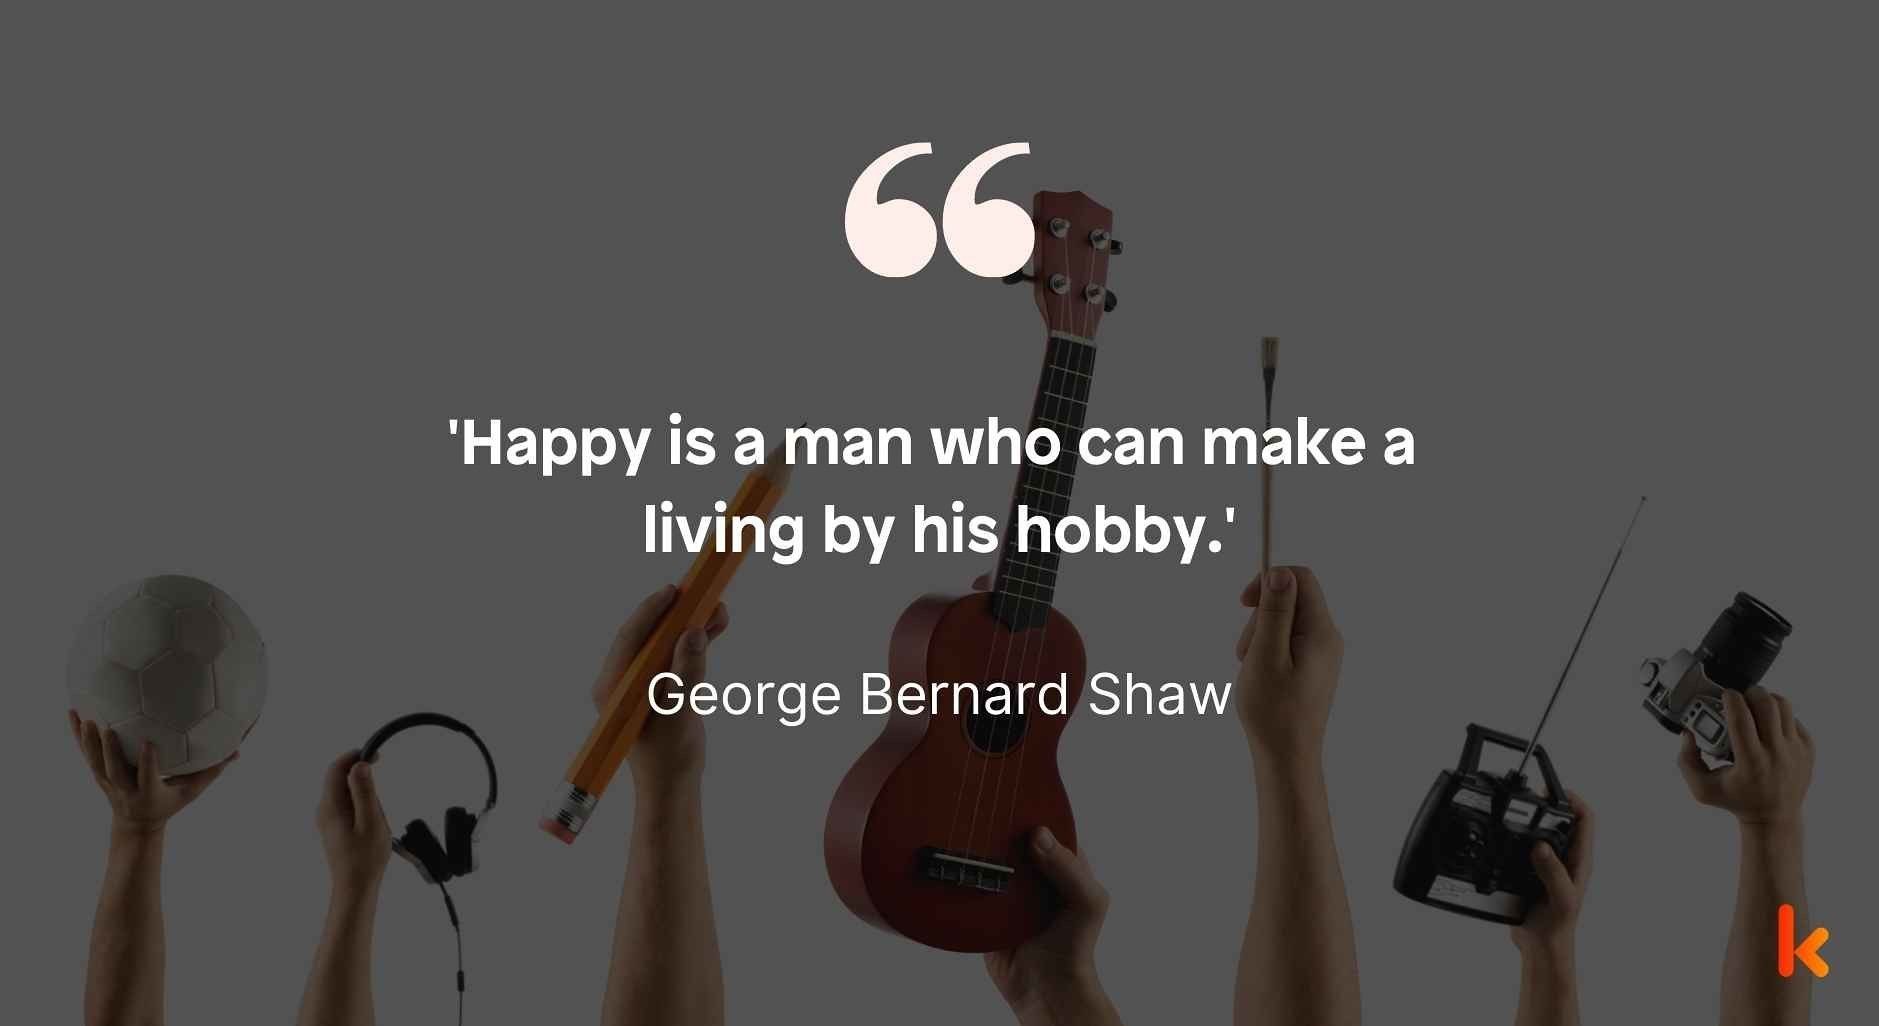 Quote on hobbies by George Bernard Shaw